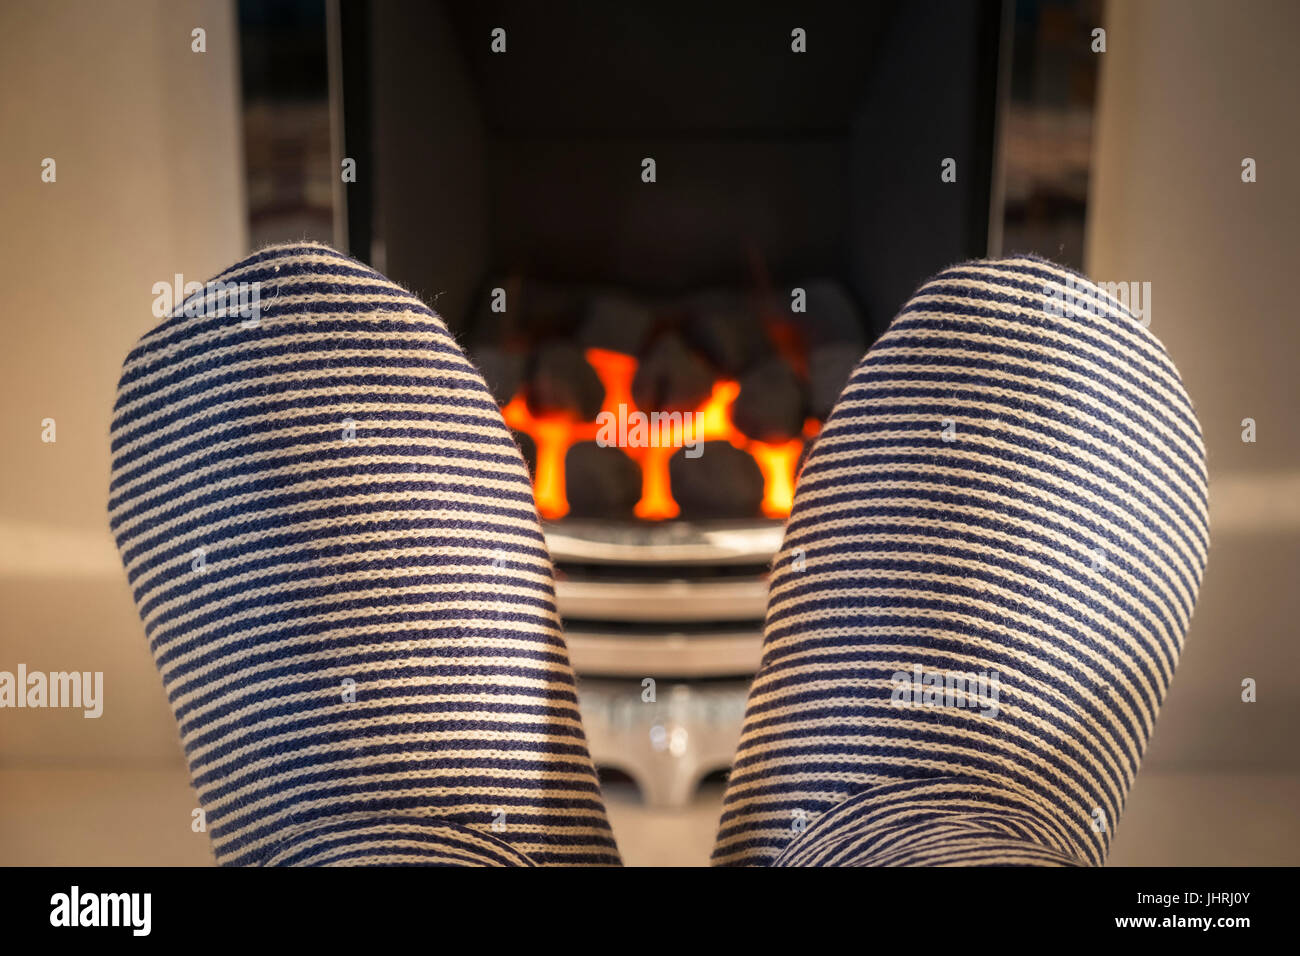 Feet with thick slippers being warmed in front of a gas fire. Stock Photo